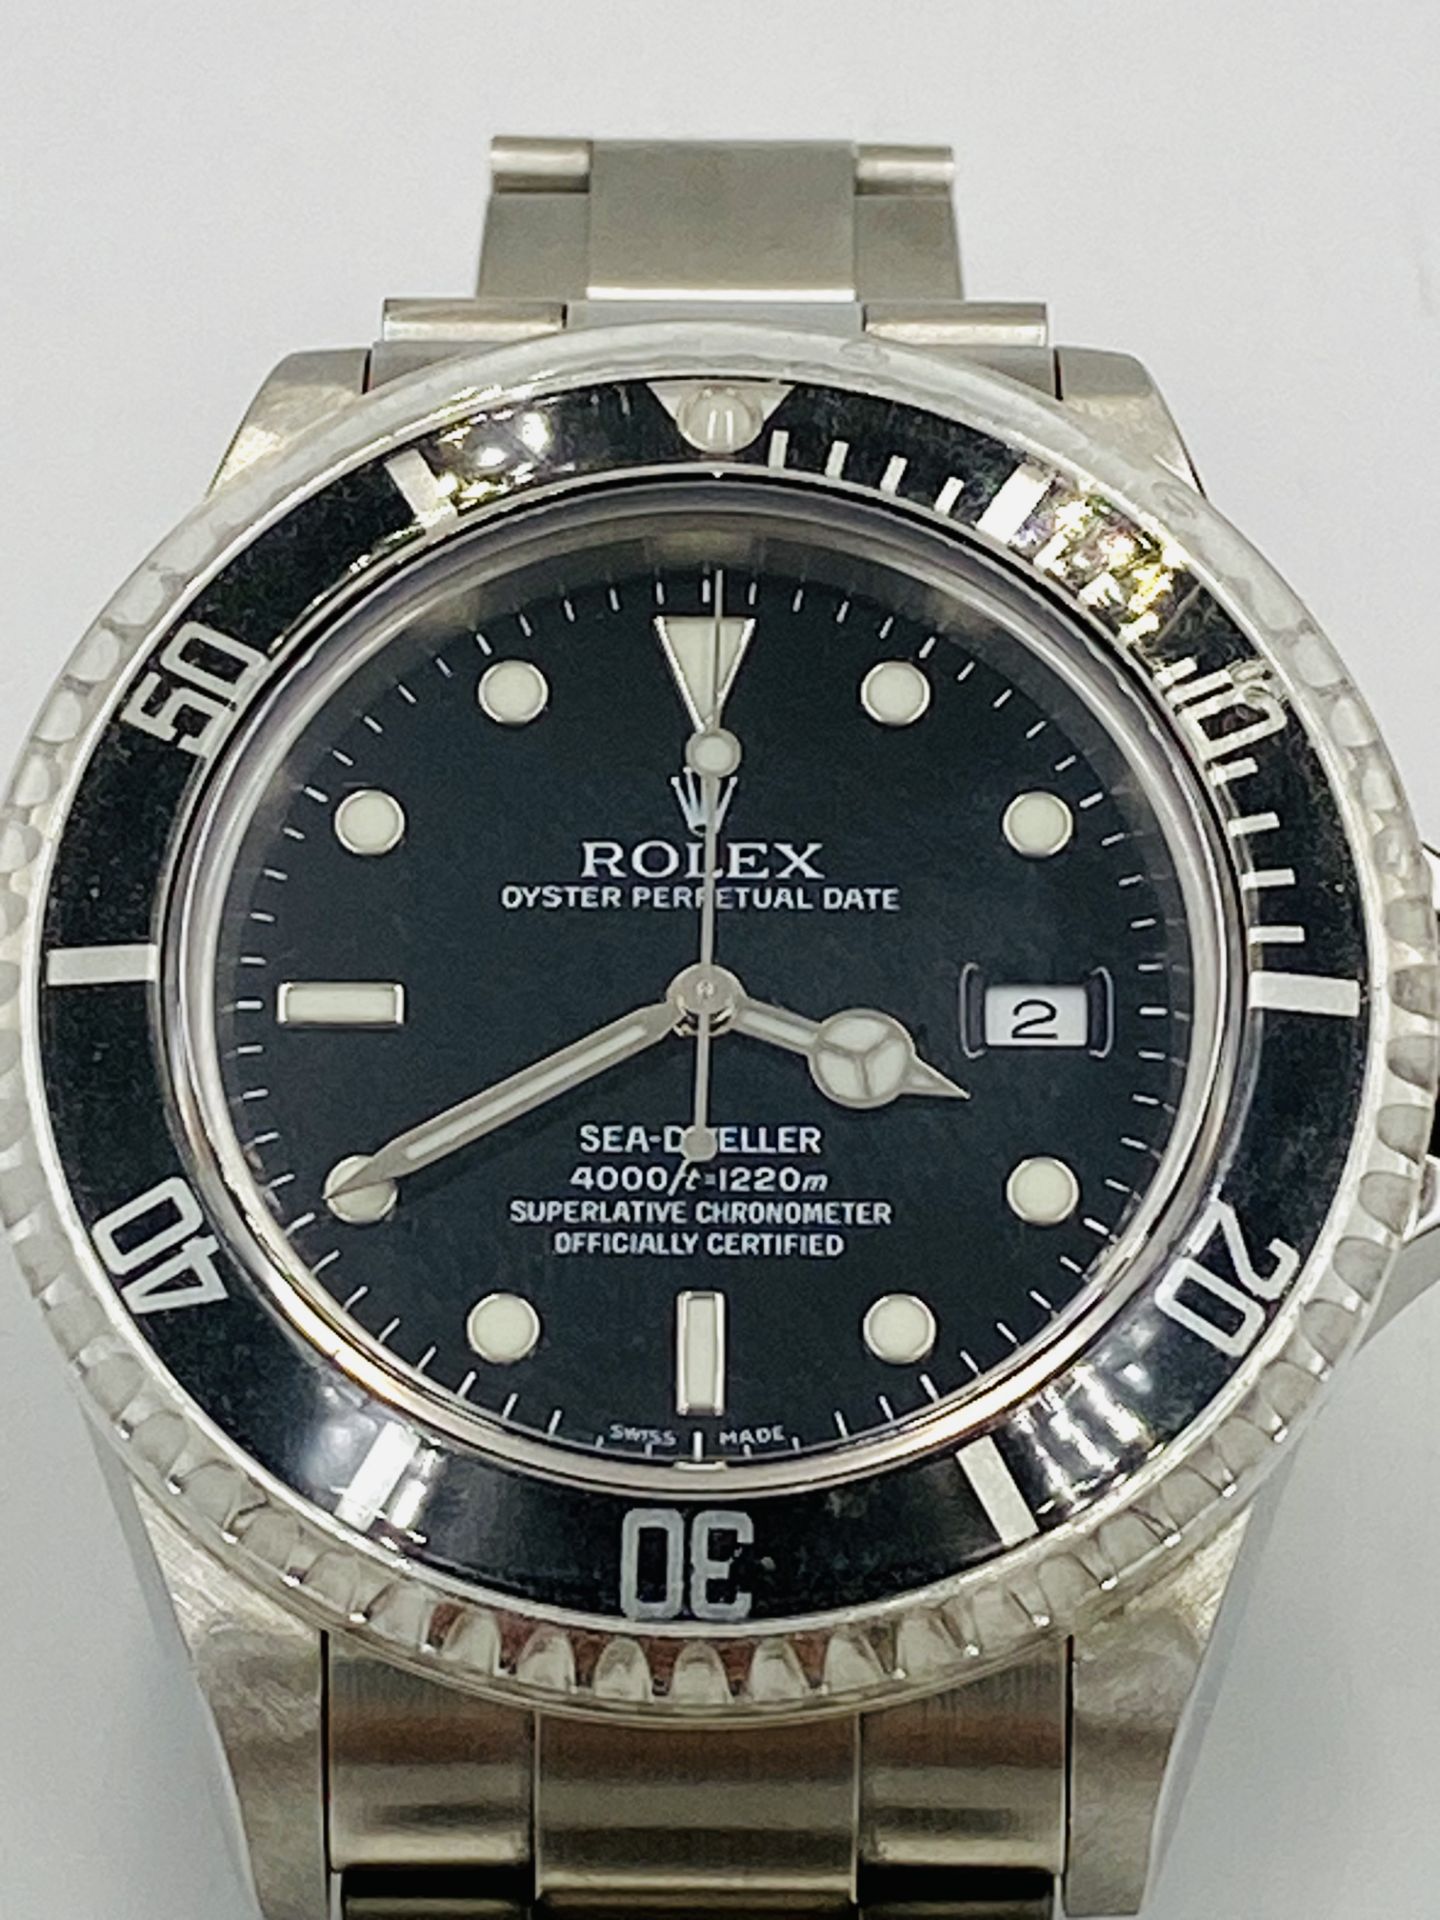 Rolex Oyster Perpetual Date Sea Dweller stainless steel wristwatch - Image 5 of 6